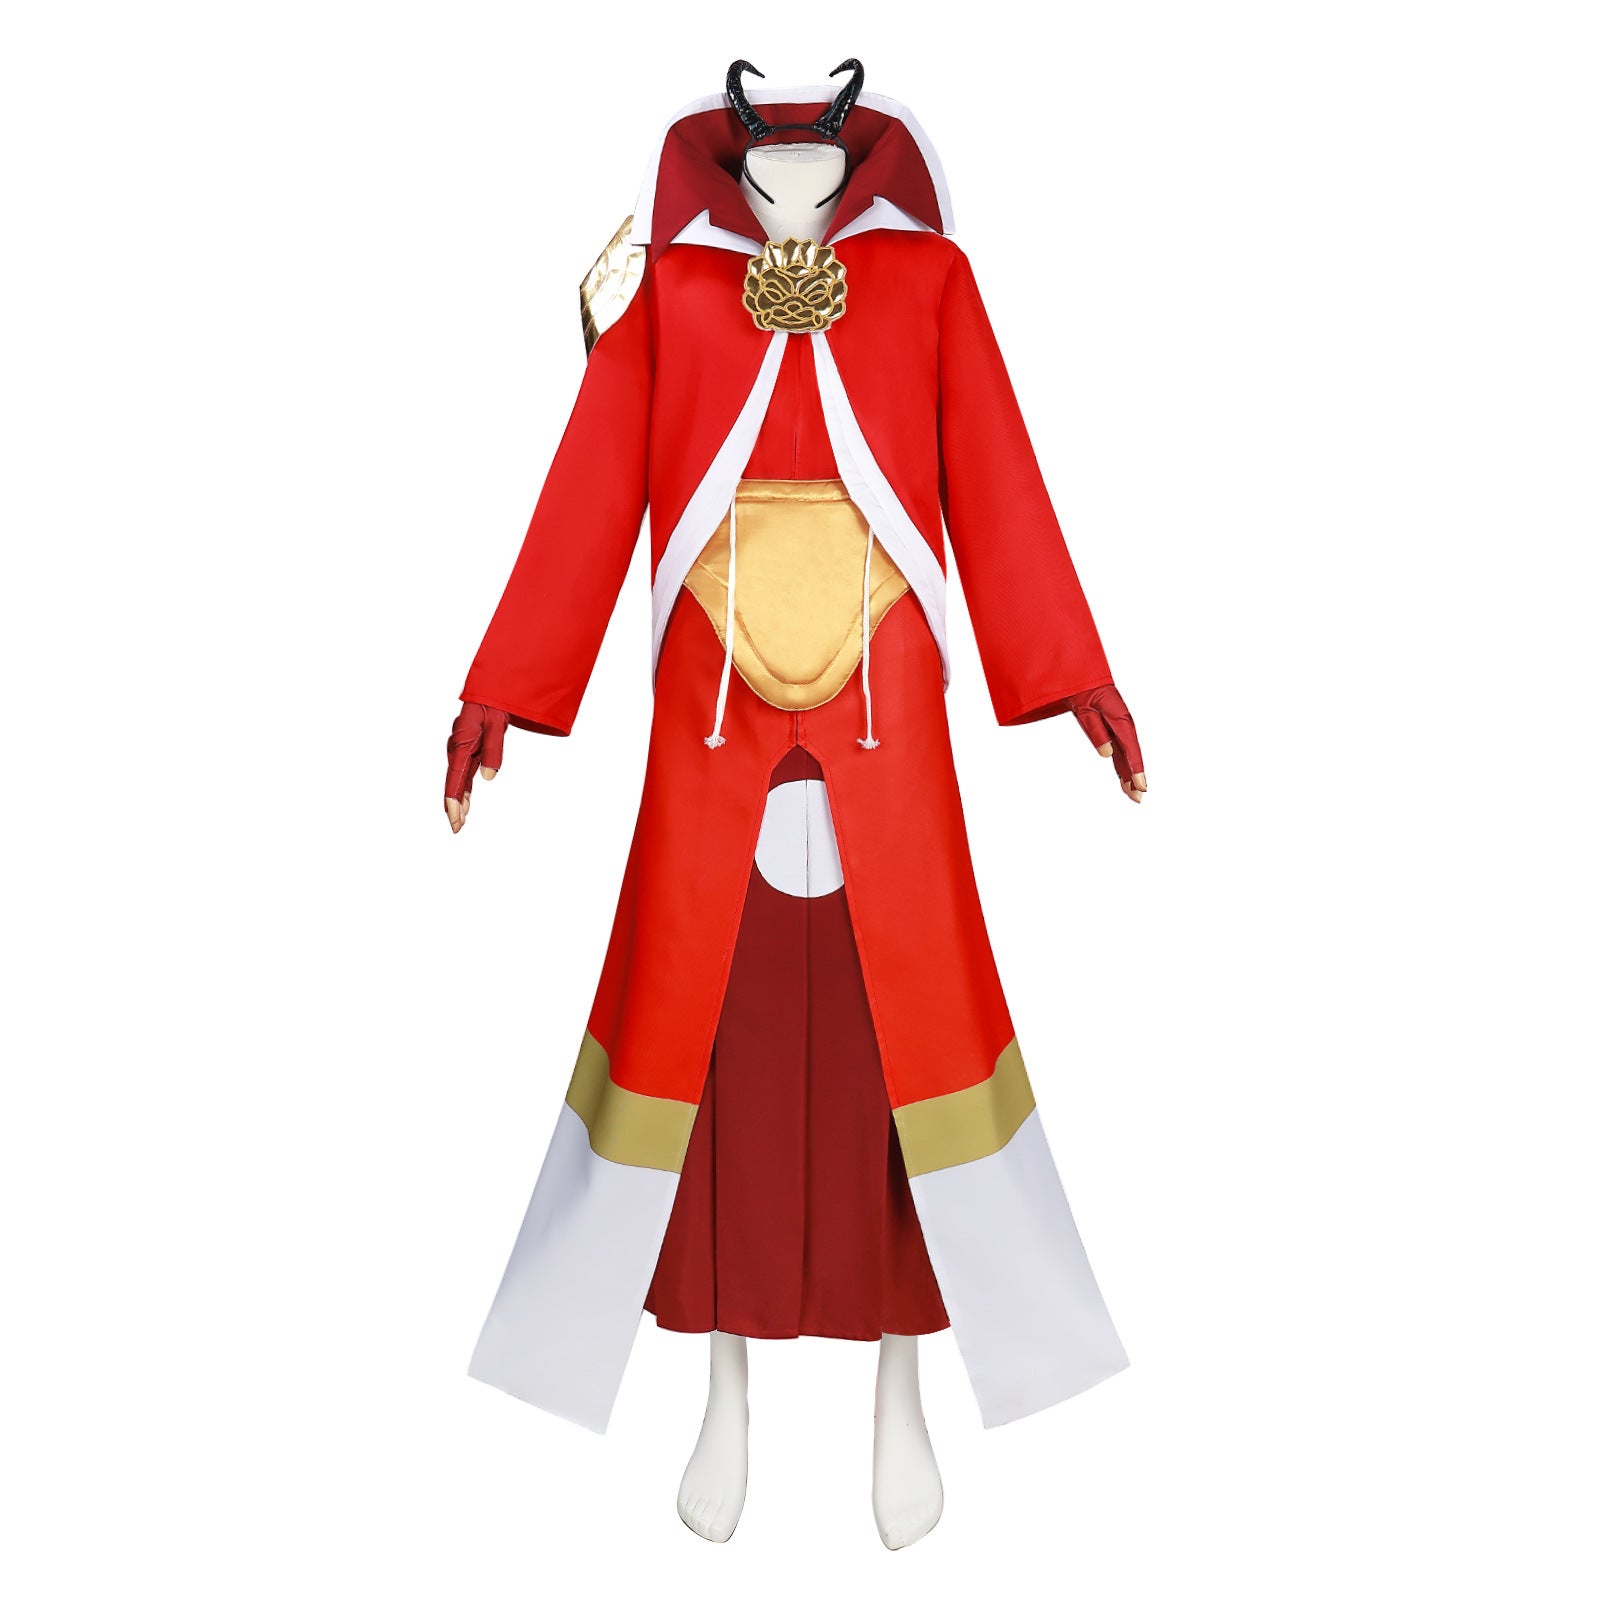 Anime That Time I Got Reincarnated As A Slime Season 3 Benimaru Red Outfits Cosplay Costume